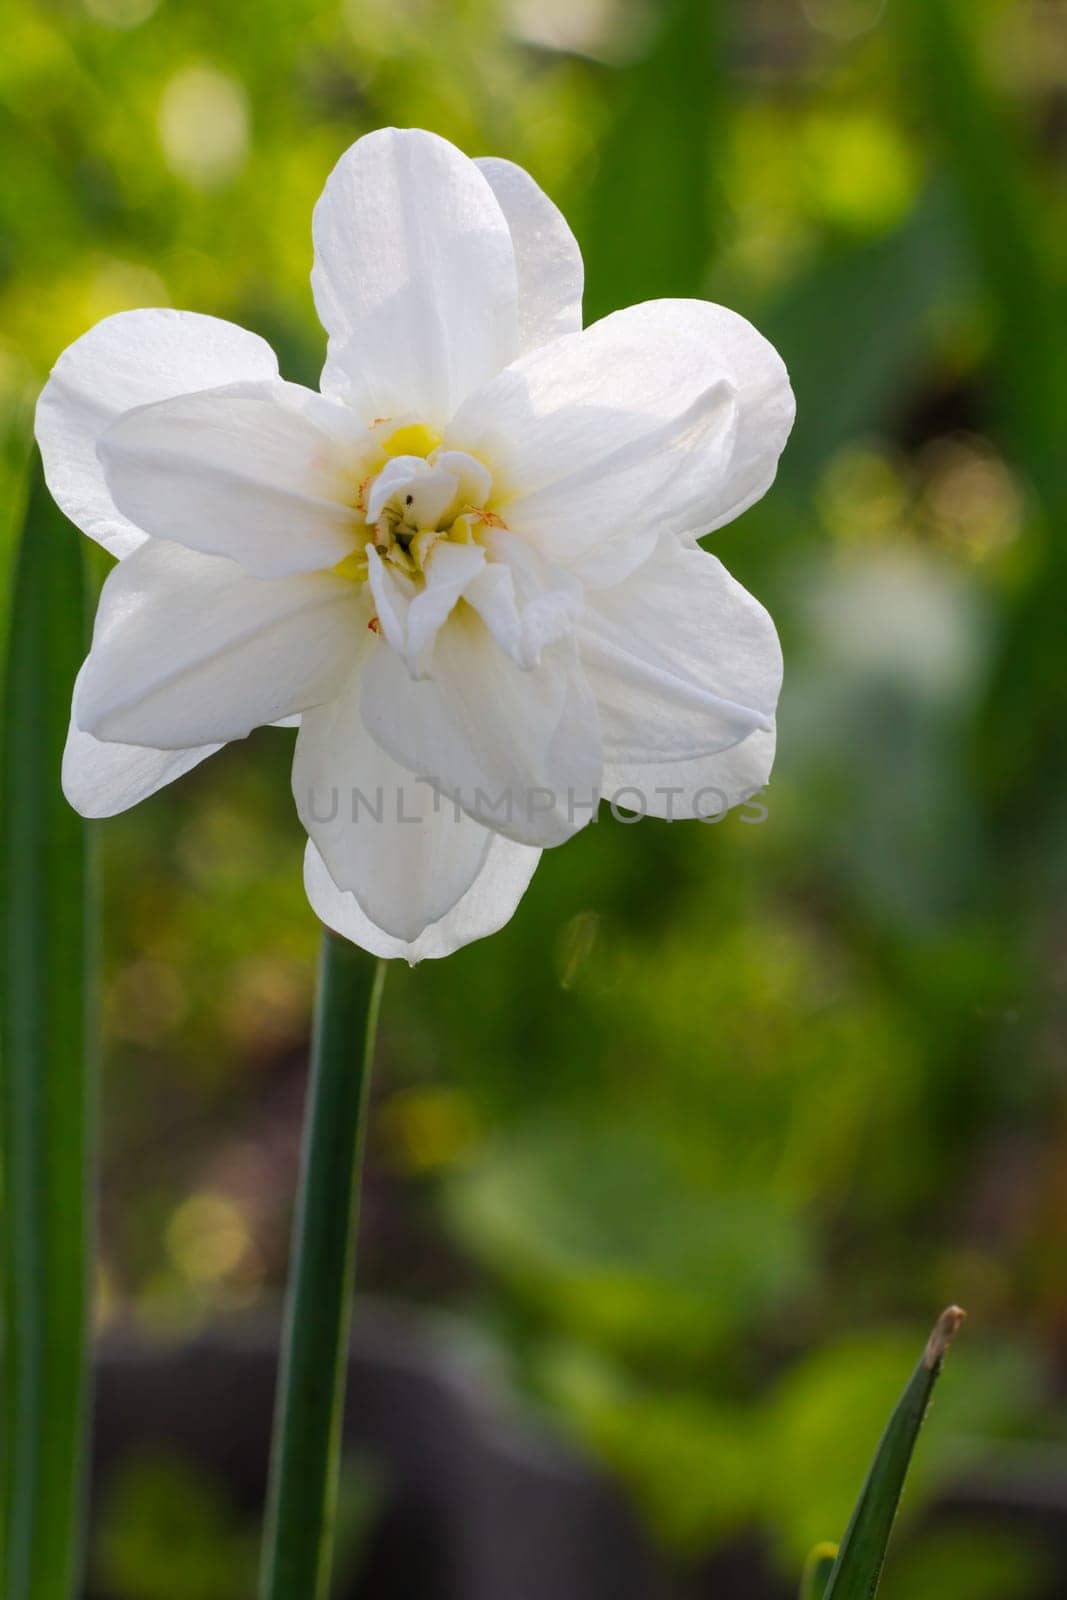 Narcissus flower. Beautiful white daffodil flower growing in the garden with the green natural background. Shallow depth of field.